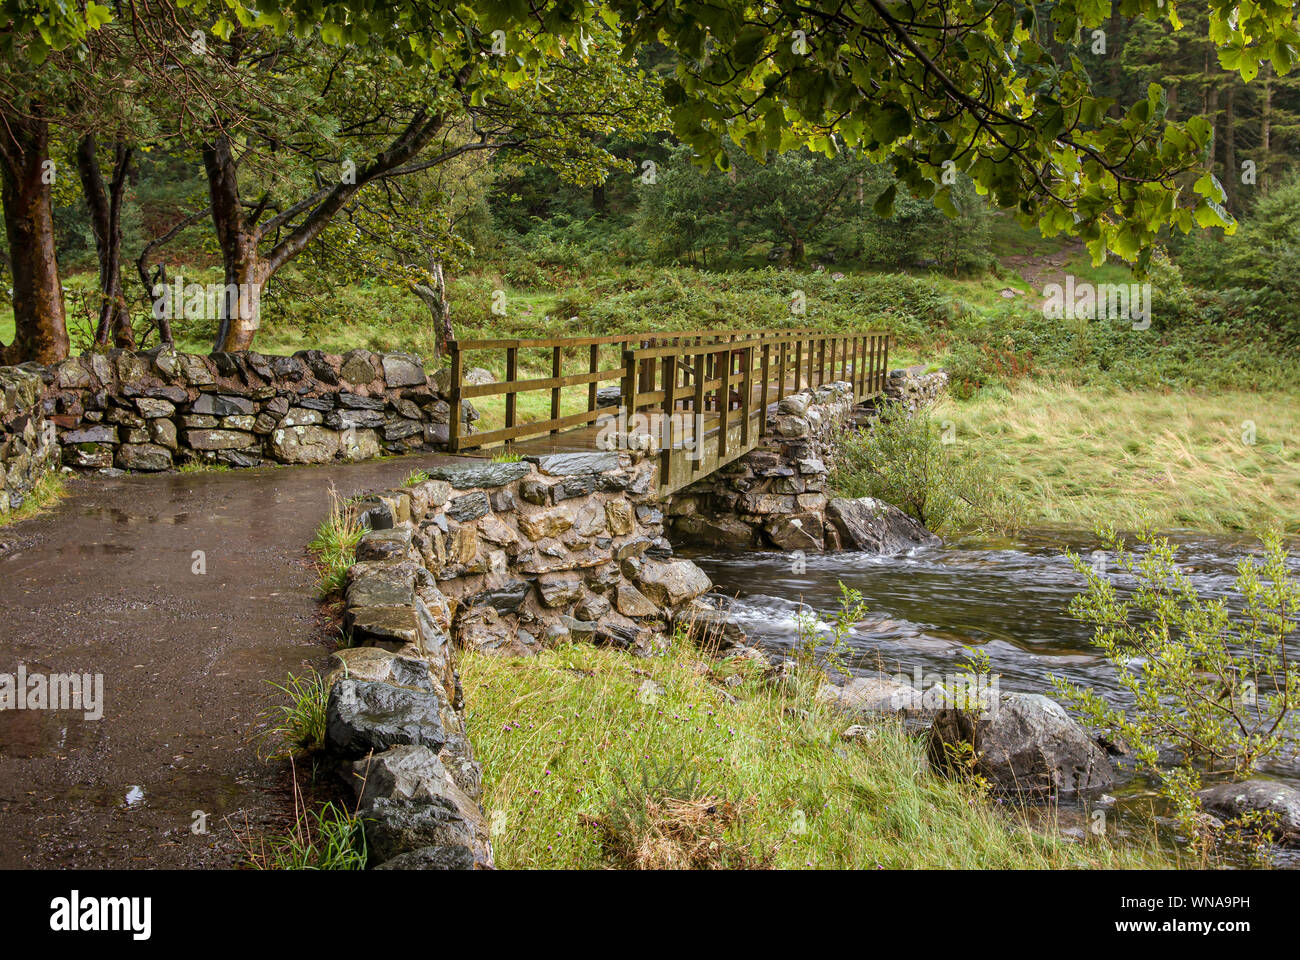 Damp path leading to a wooden bridge over a stream with wooded area beyond. Stock Photo